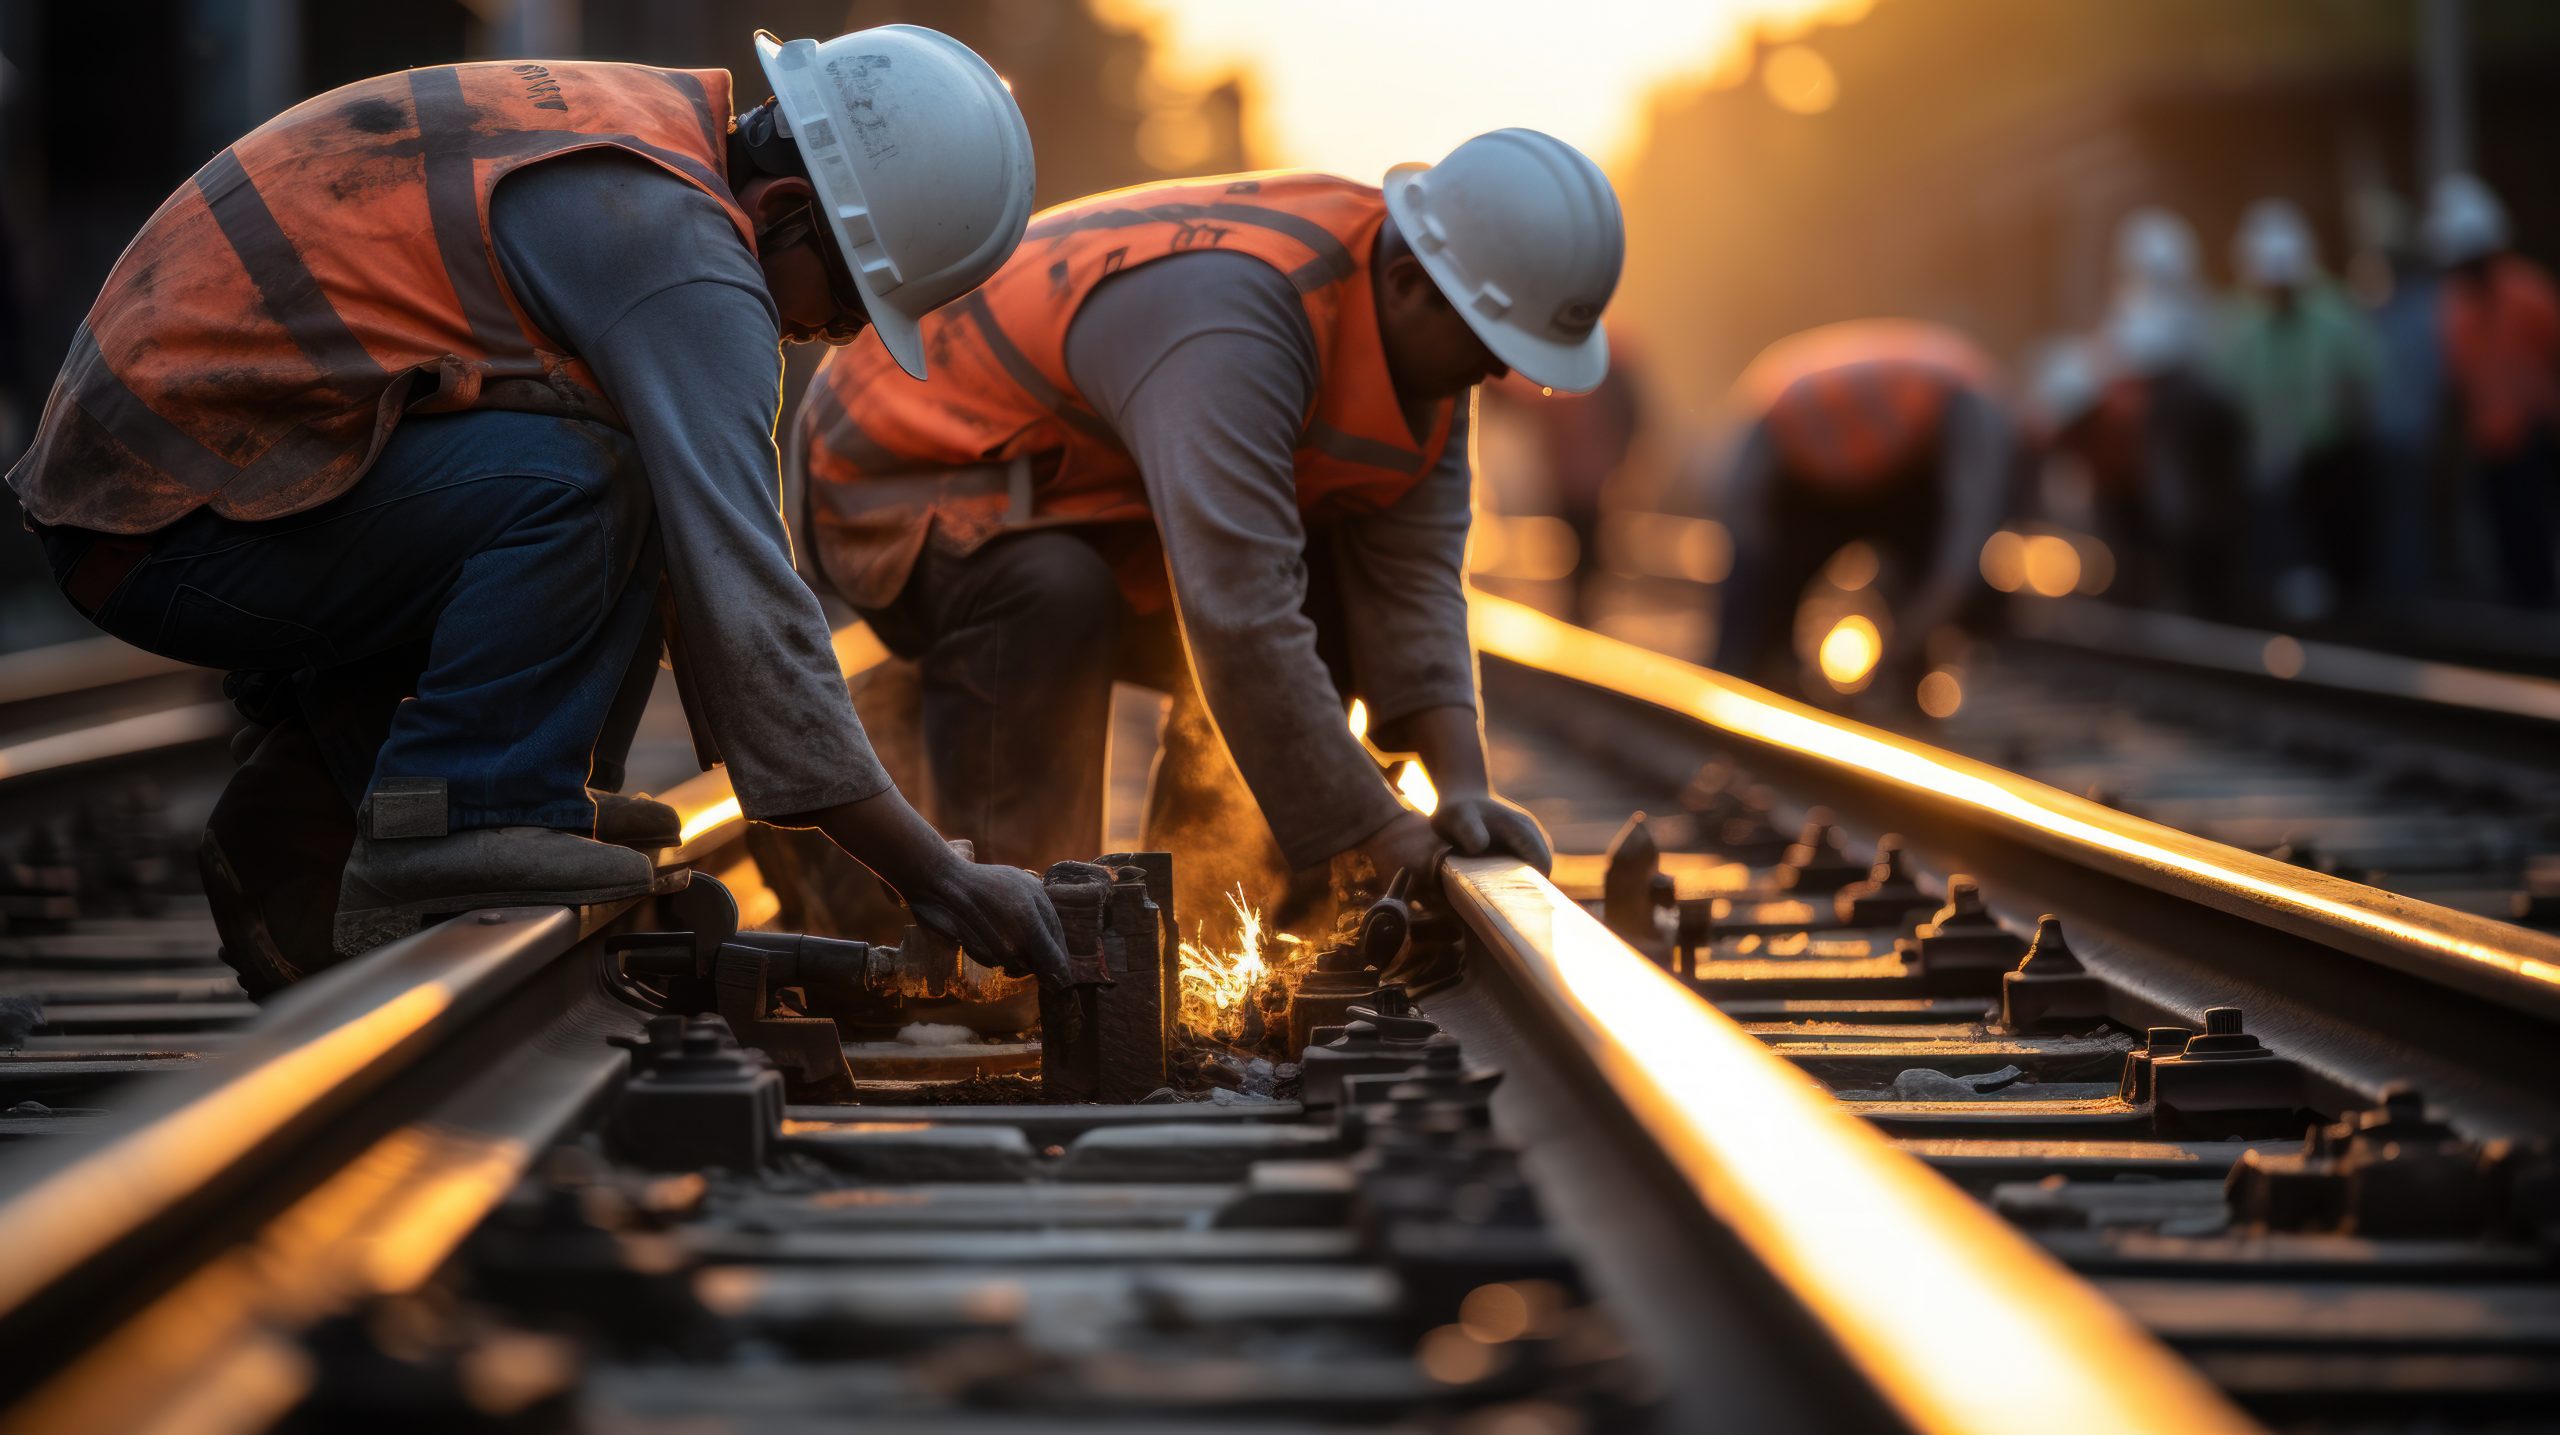 how are railroad ties replaced? Railroad contractors working on railroad tracks concept image.